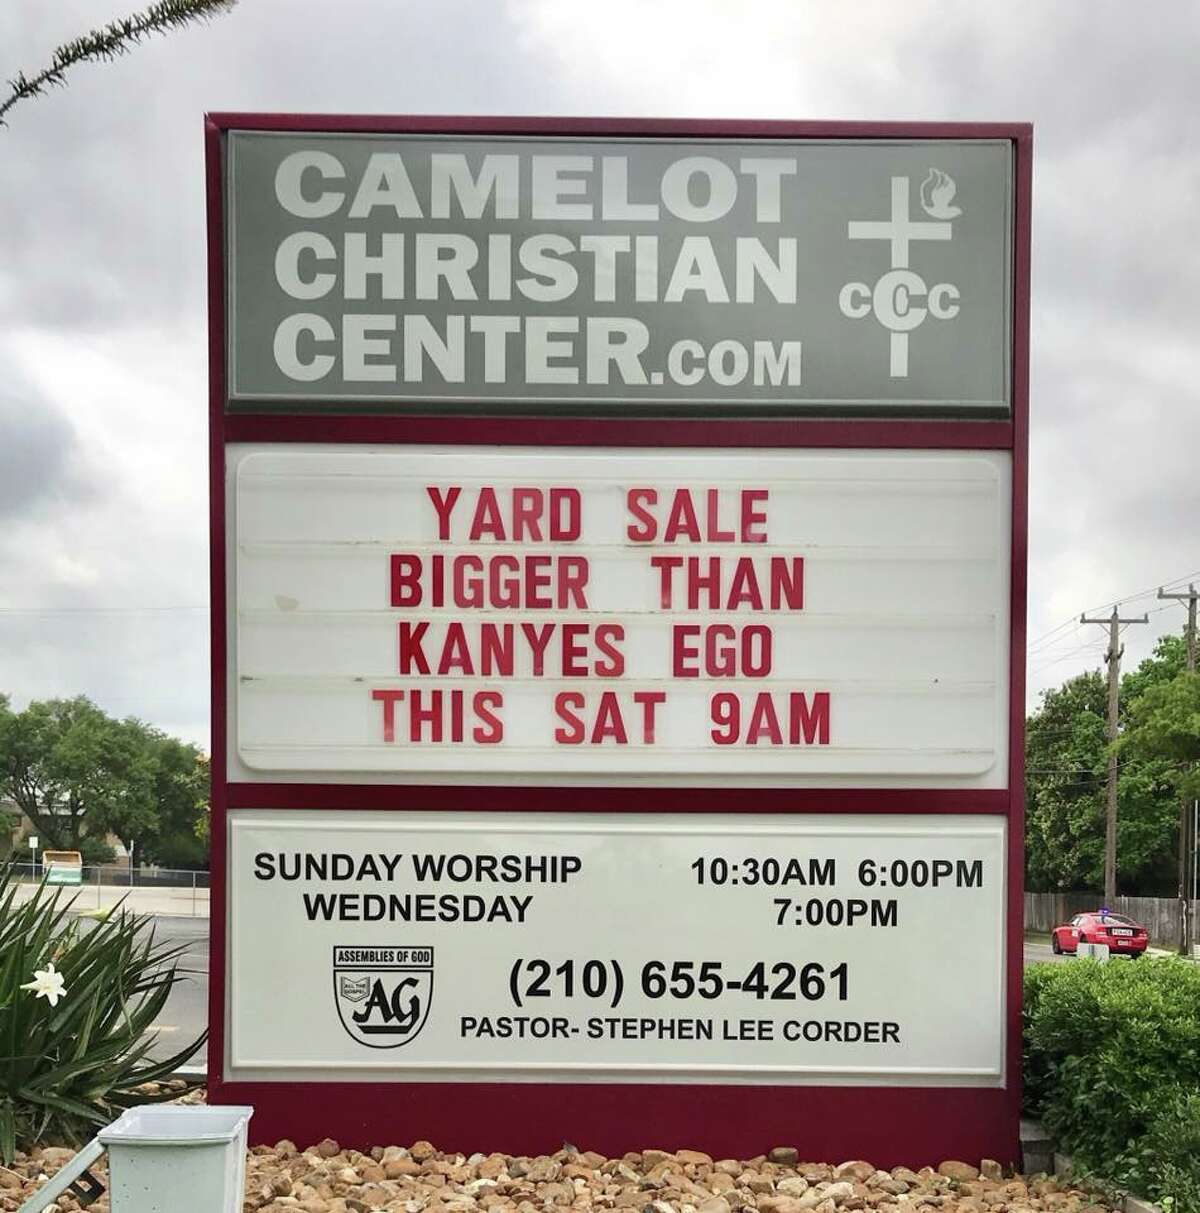 Camelot Christian Center's quip-filled messages have been a hit in its San Antonio neighborhood.